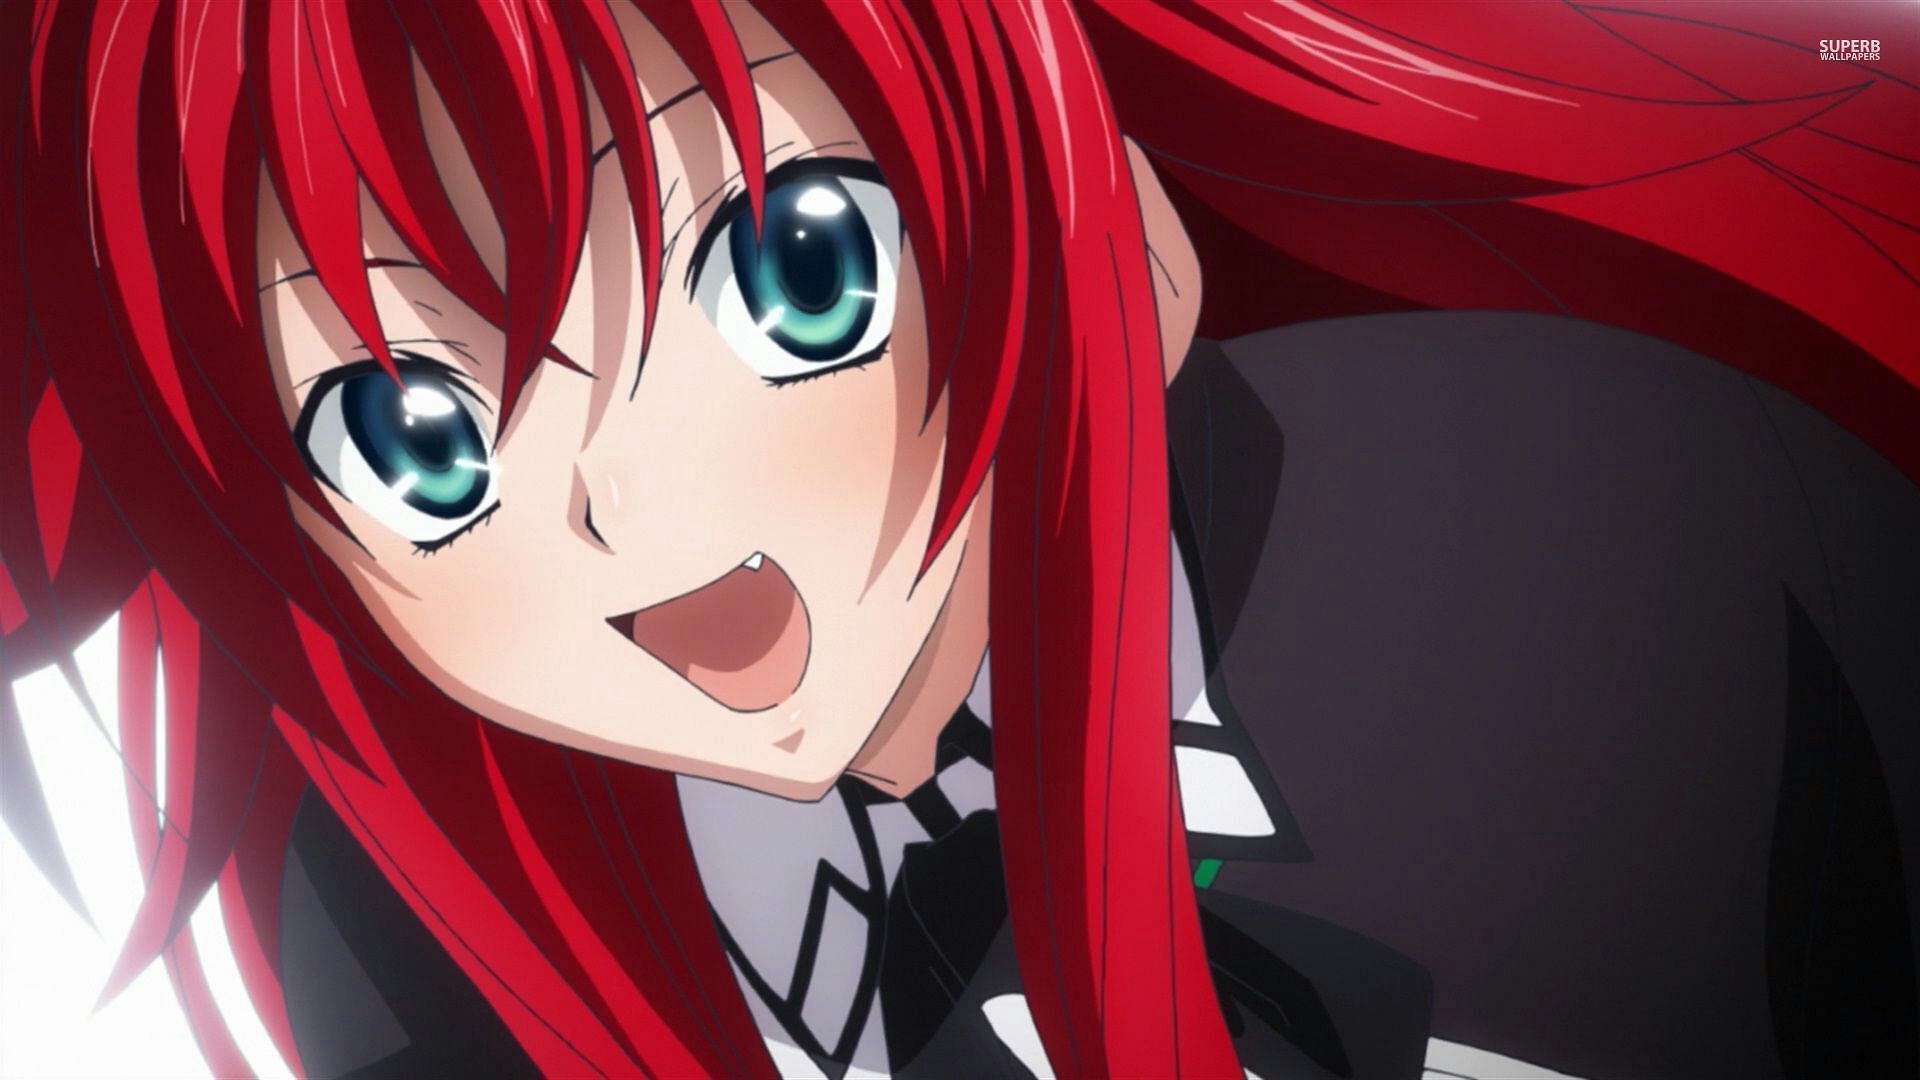 This kind smile hides the power of destruction (Image credit: Ichiei Ishibumi, High School DxD)